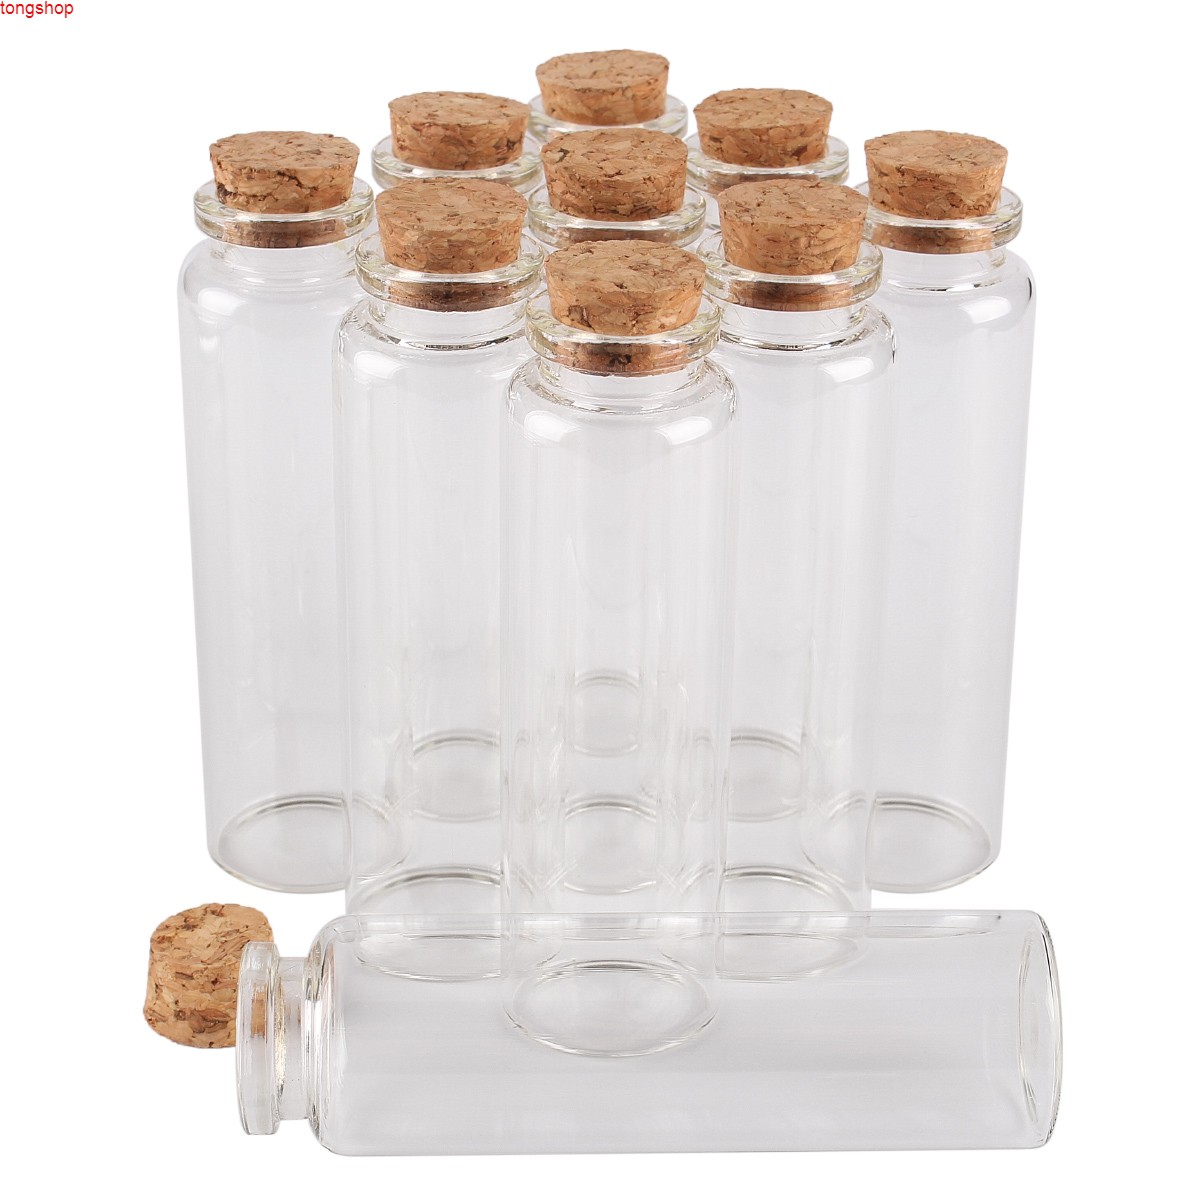 

wholesale 24 pieces 50ml 30*100mm Glass Bottles with Cork Stopper Spice Container Jars Vials for Wedding Giftgoods